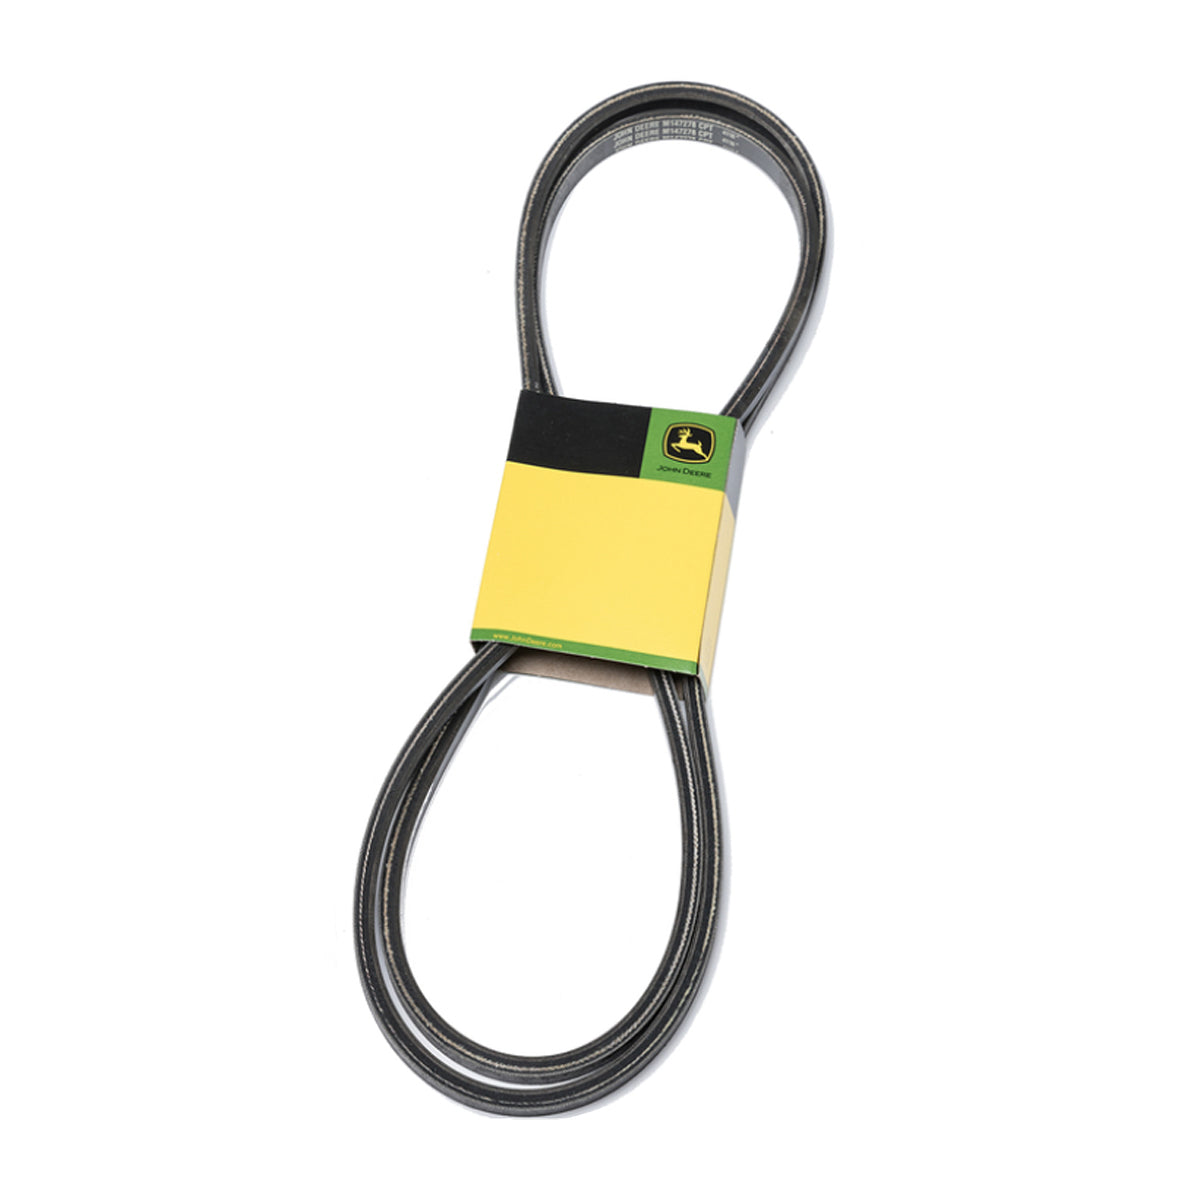 John Deere Drive Belt for Powerflow Material Collection Systems - M147278